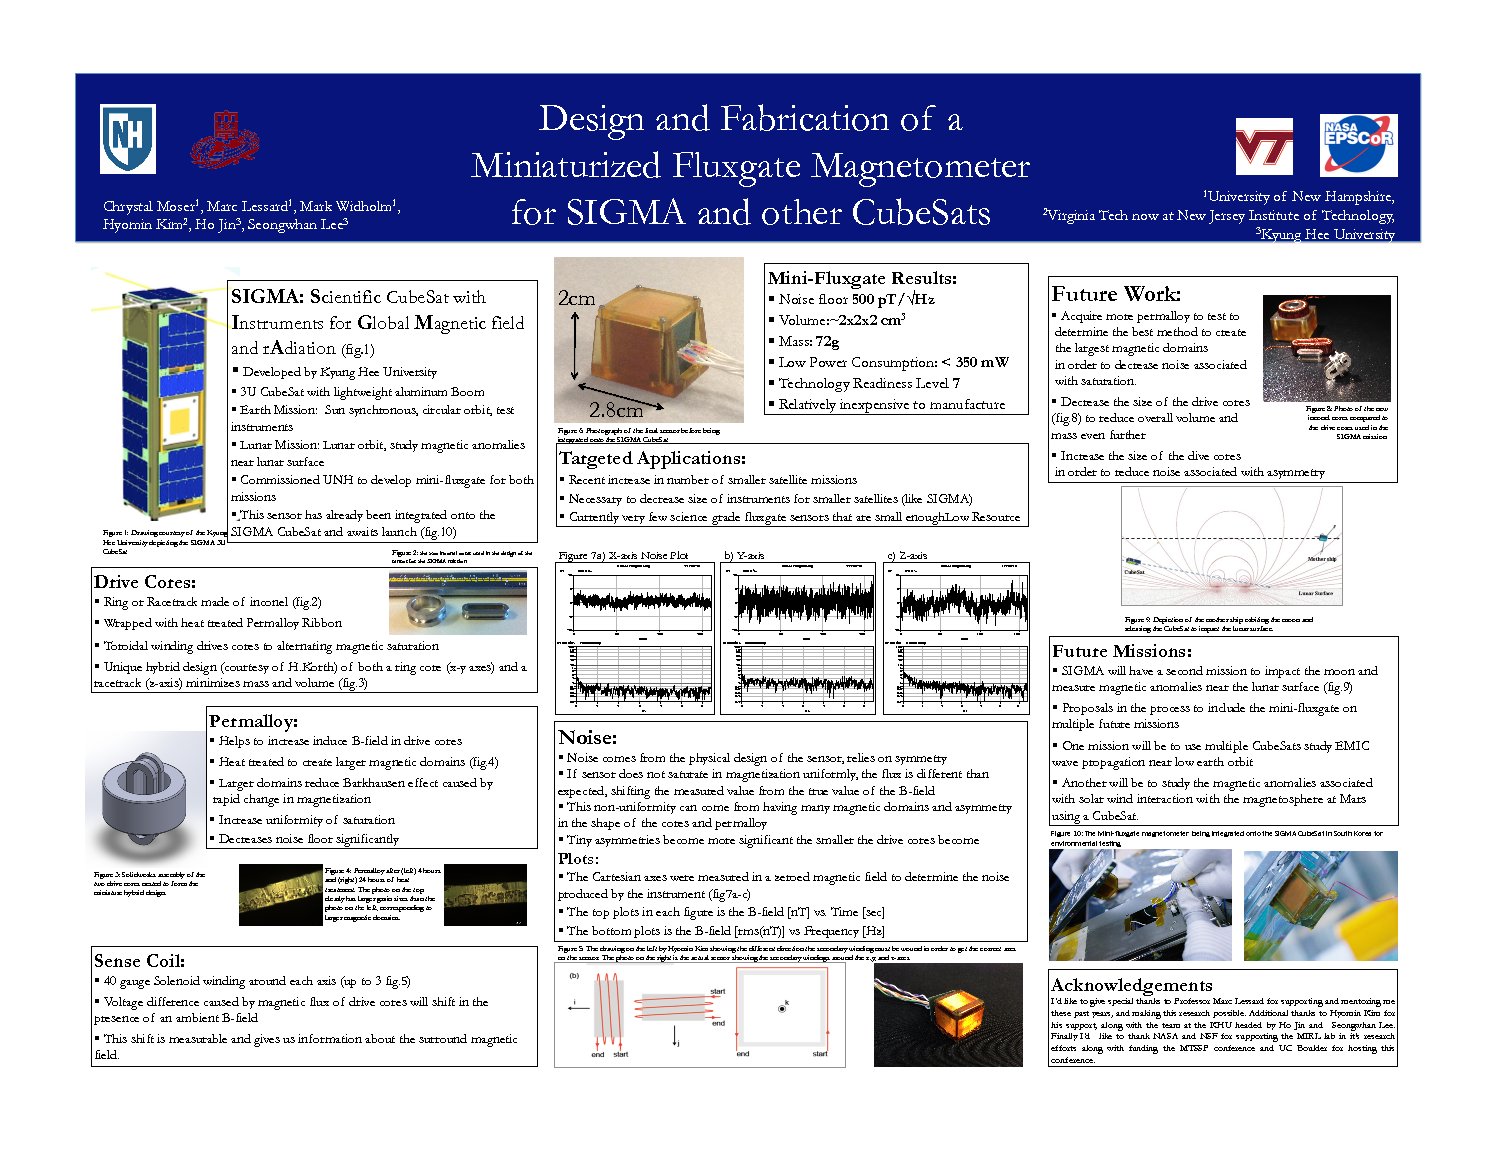 Design And Fabrication Of A Miniaturized Fluxgate Magnetometer For Sigma And Other Cubesats by csp42